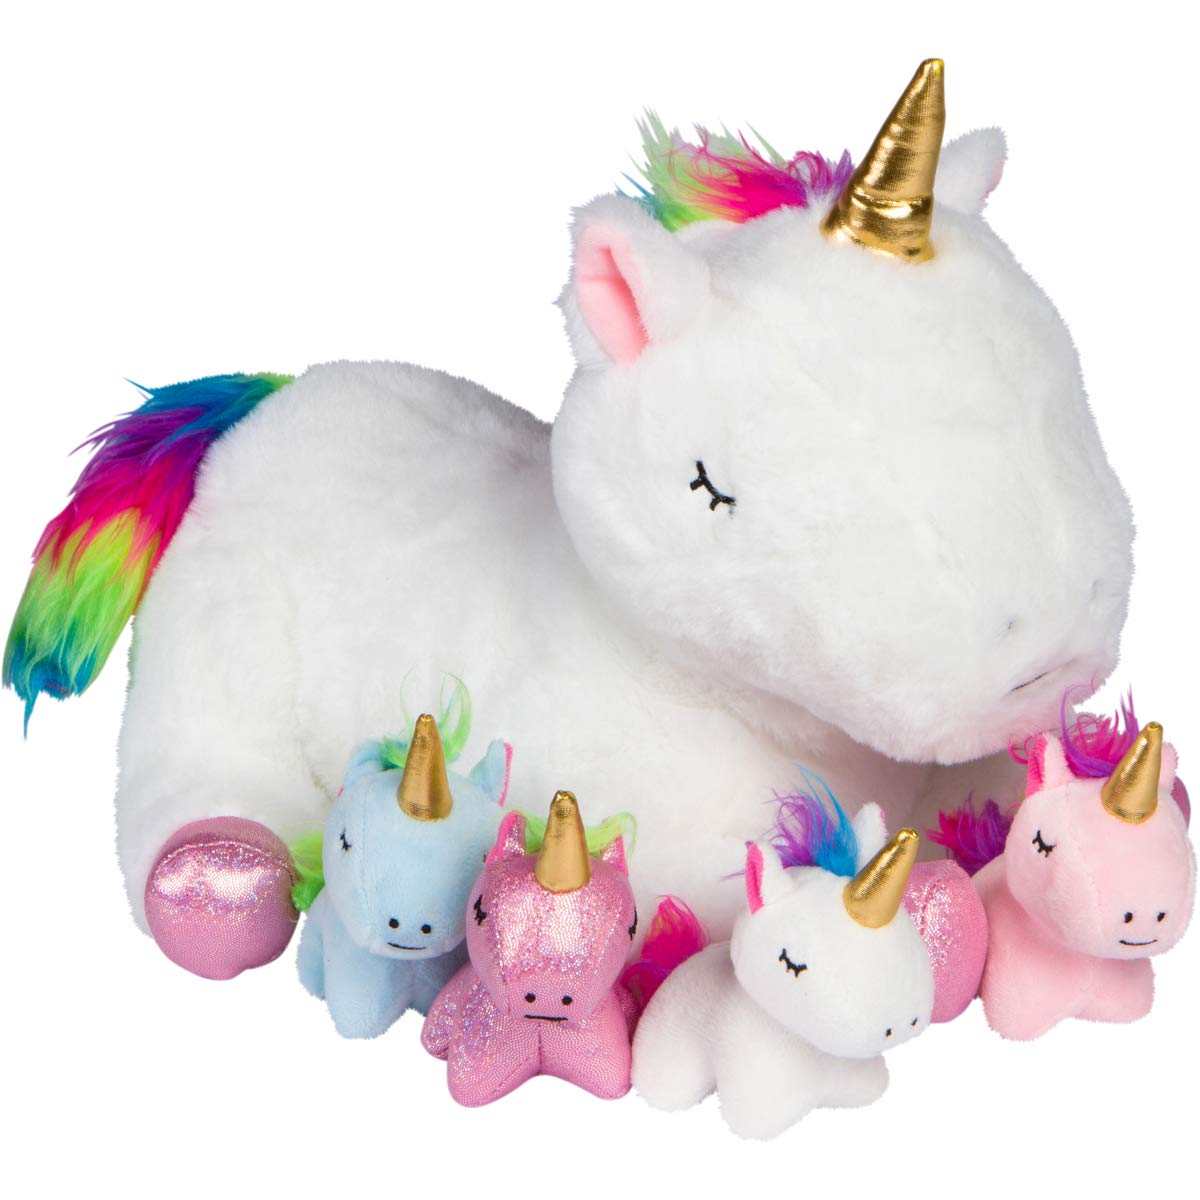 Unicorn Stuffed Animals for Girls Ages 3 4 5 6 7 8 Years; Stuffed Mommy Unicorn with 4 Baby Unicorns in her Tummy; Toy Unicorn Pillows for Girls